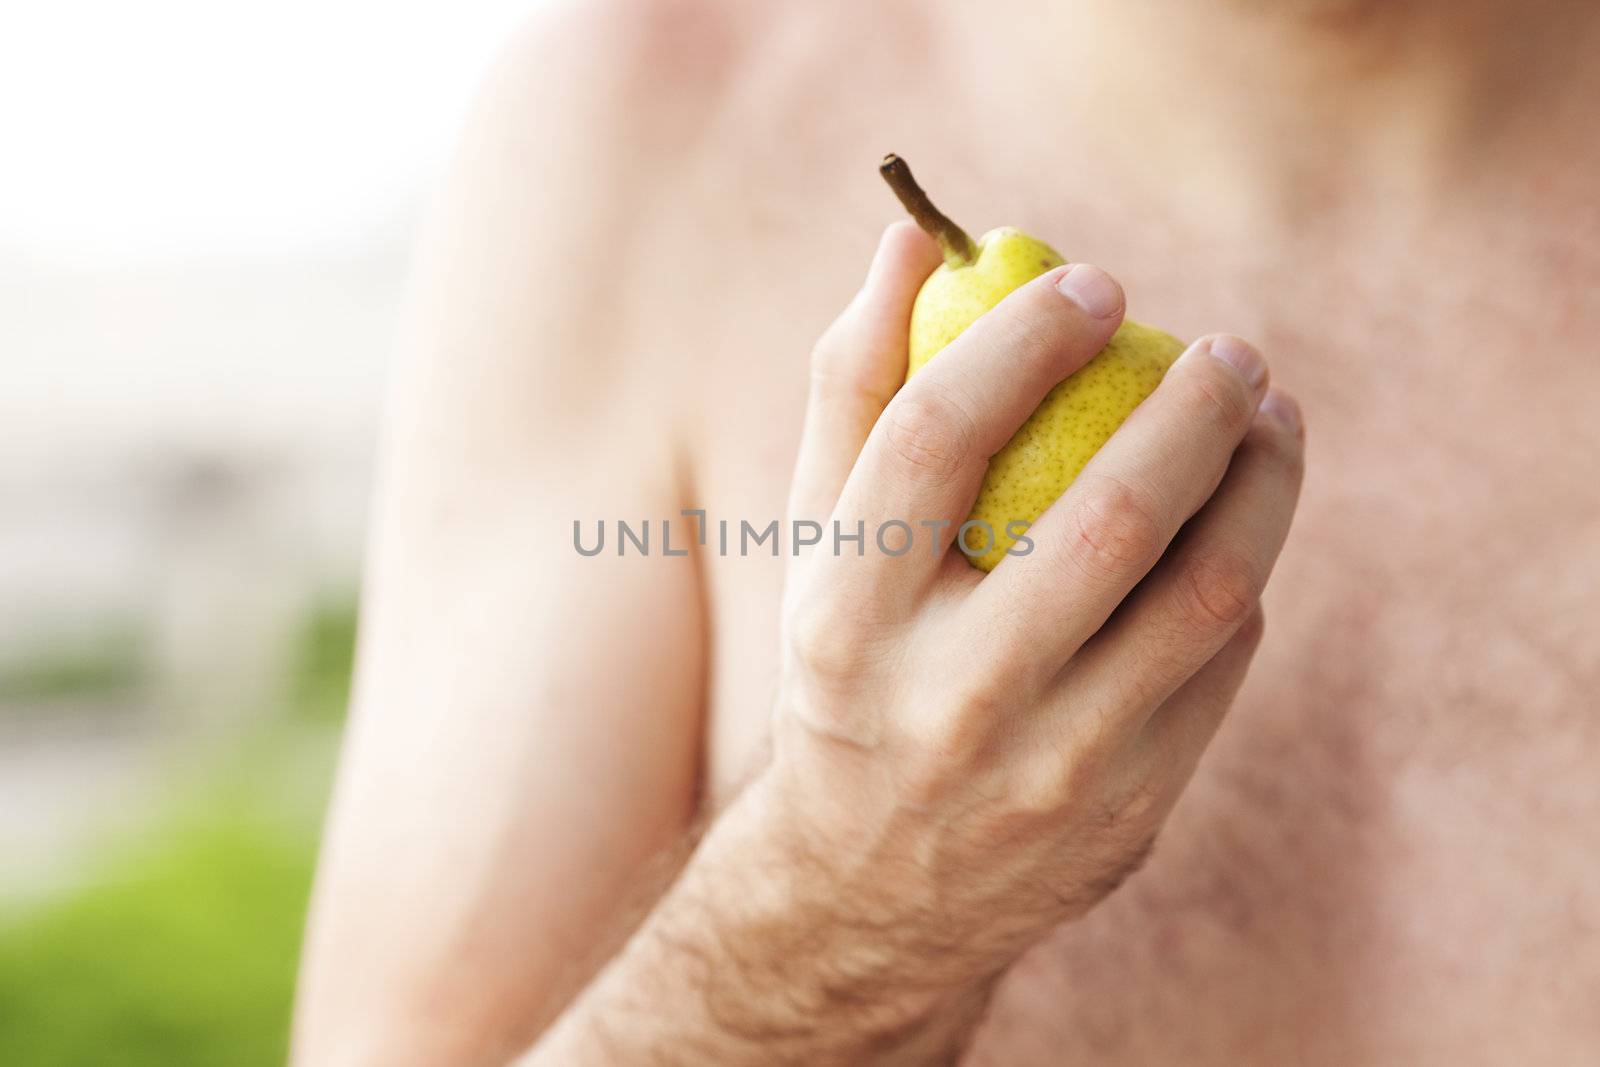 man holding a pear in his hand